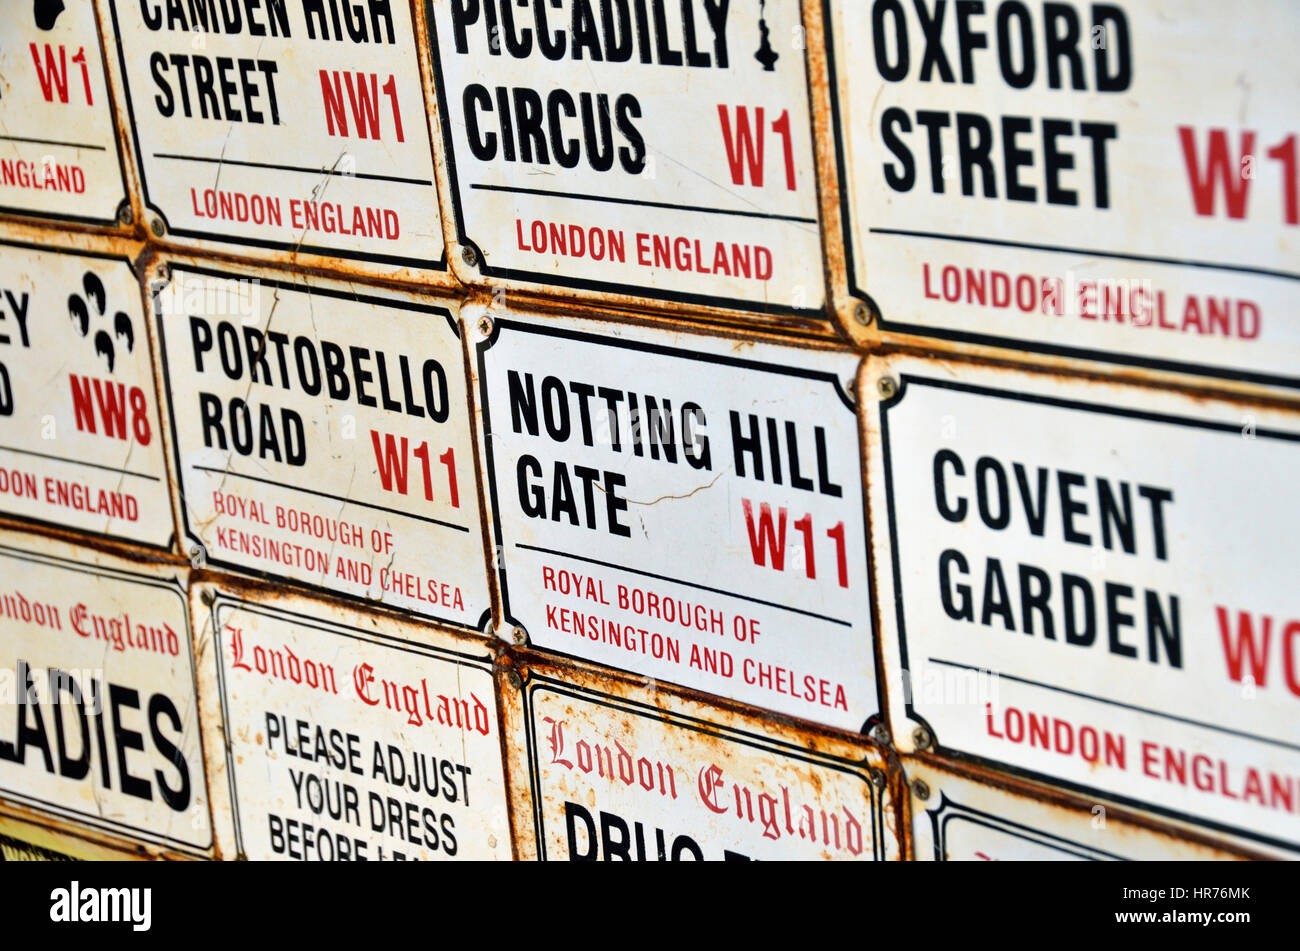 Numerous street signs of well known London locations. Stock Photo